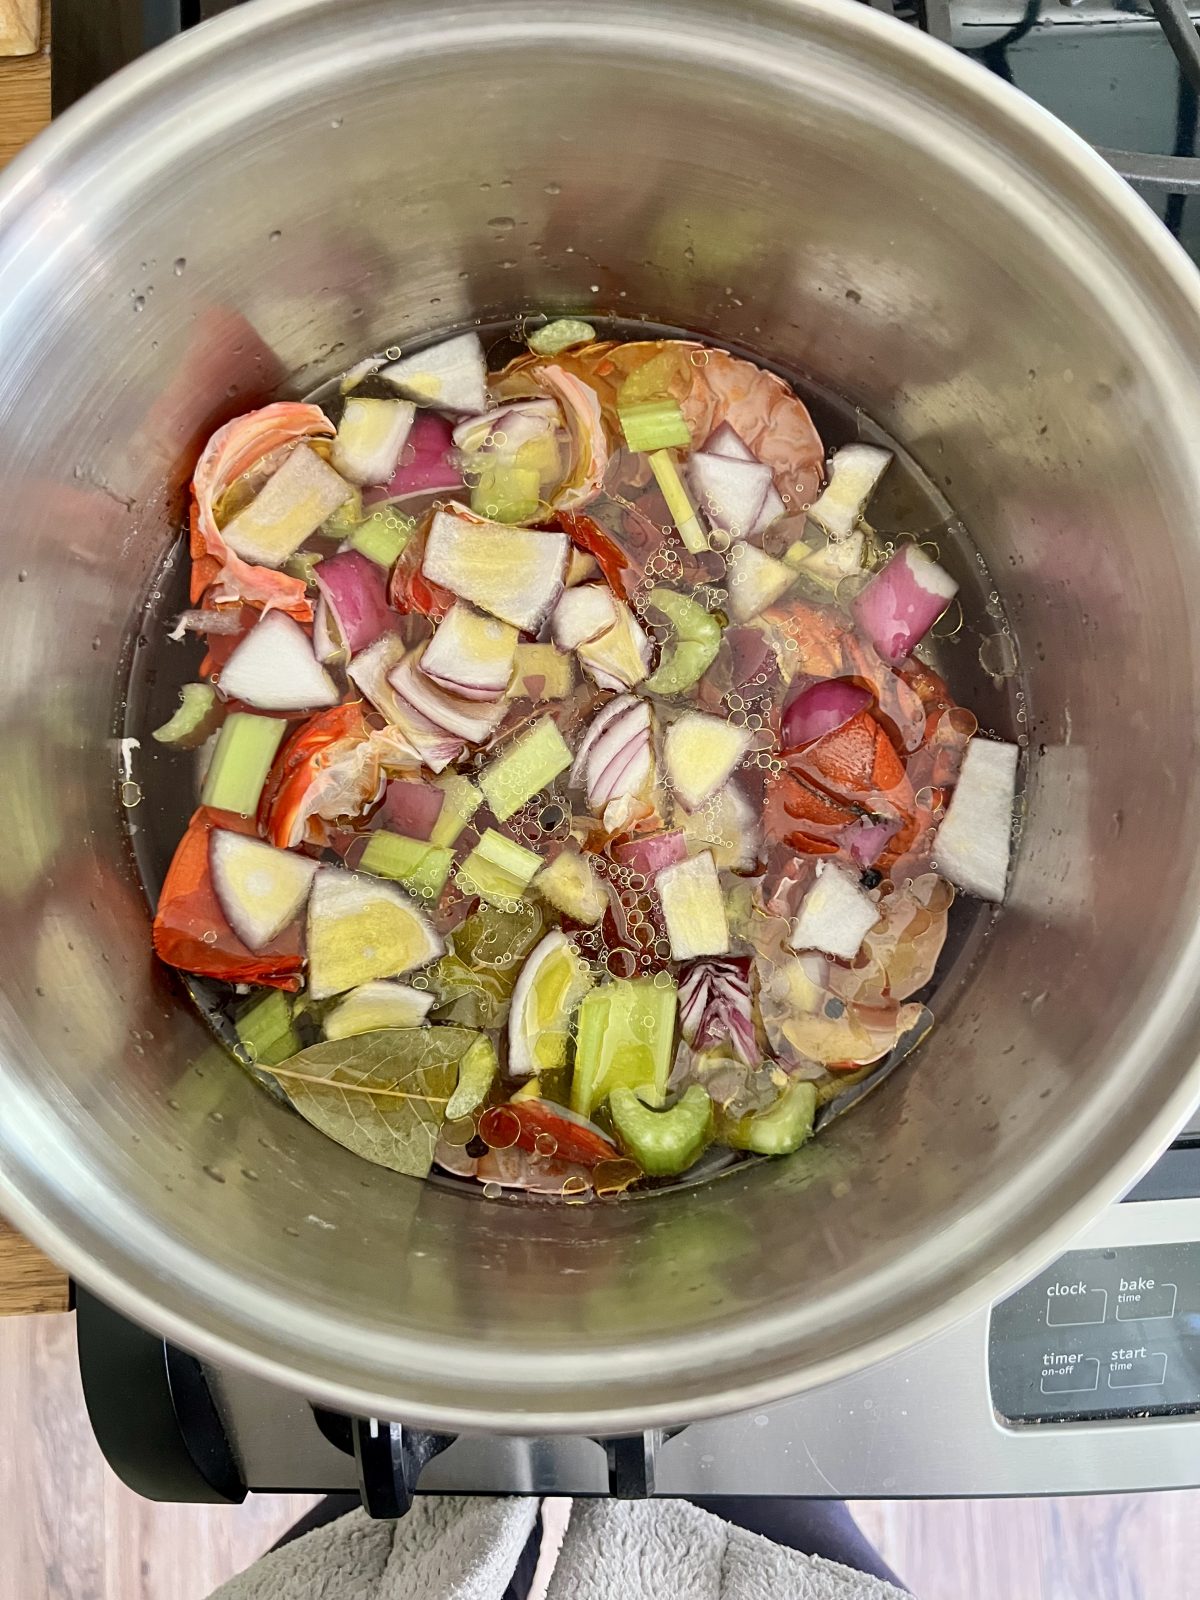 Spiny Lobster Stock made with oil and celery and purple onion